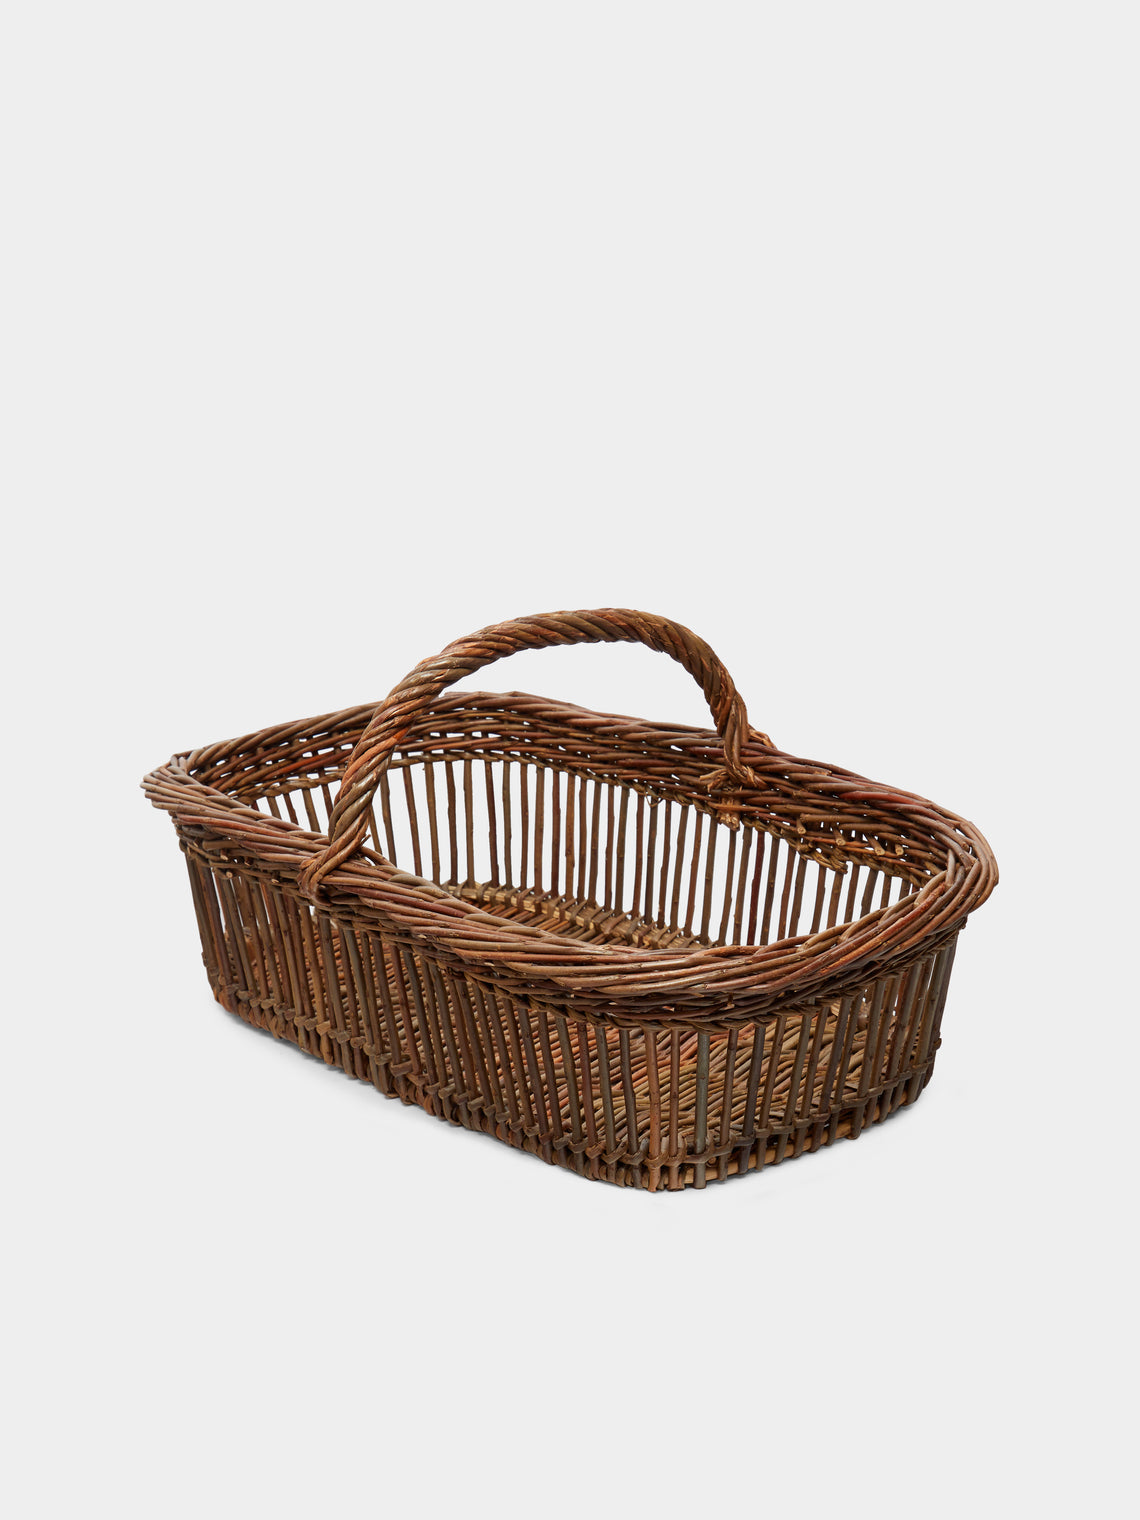 Valérie Lavaure - Handwoven Willow Strawberry Basket -  - ABASK - 